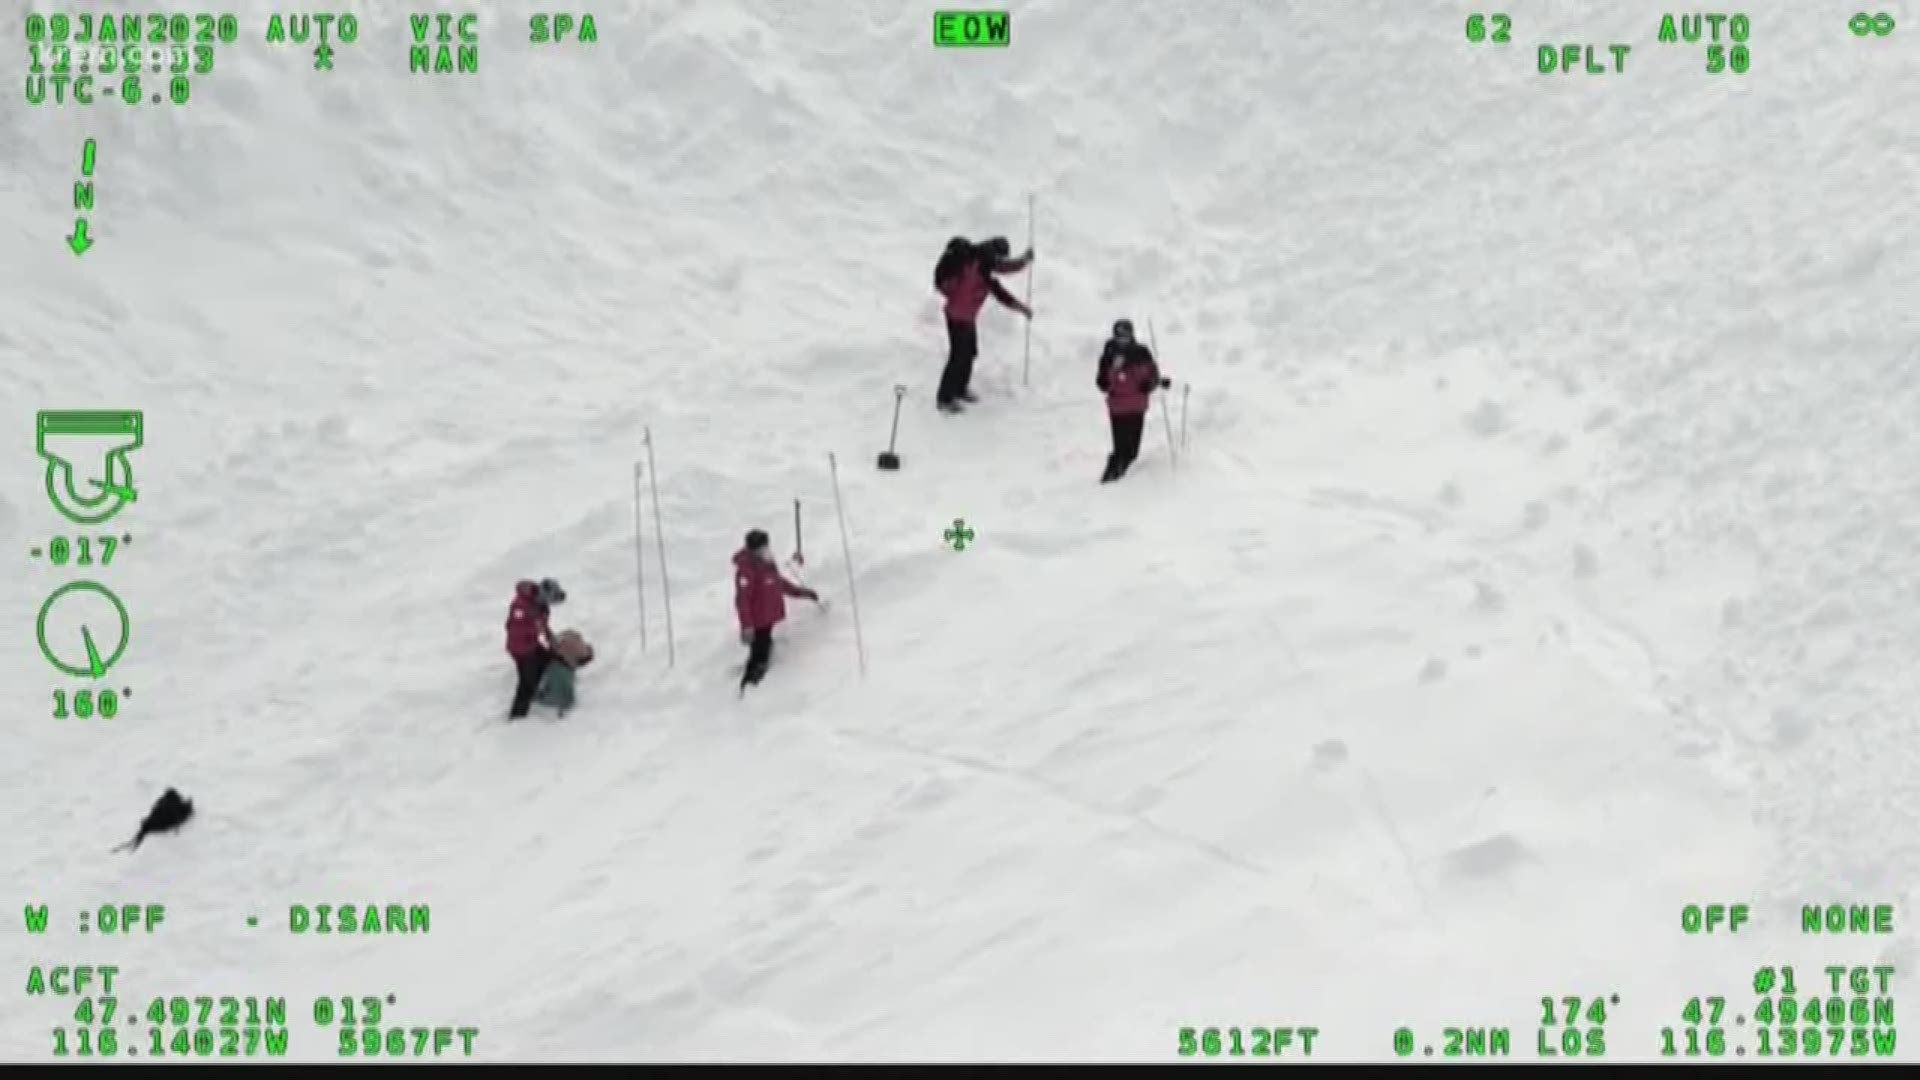 A Recco device helped search and rescue crews find a person buried by the Silver Mountain avalanche. Taylor Viydo explains how they work.